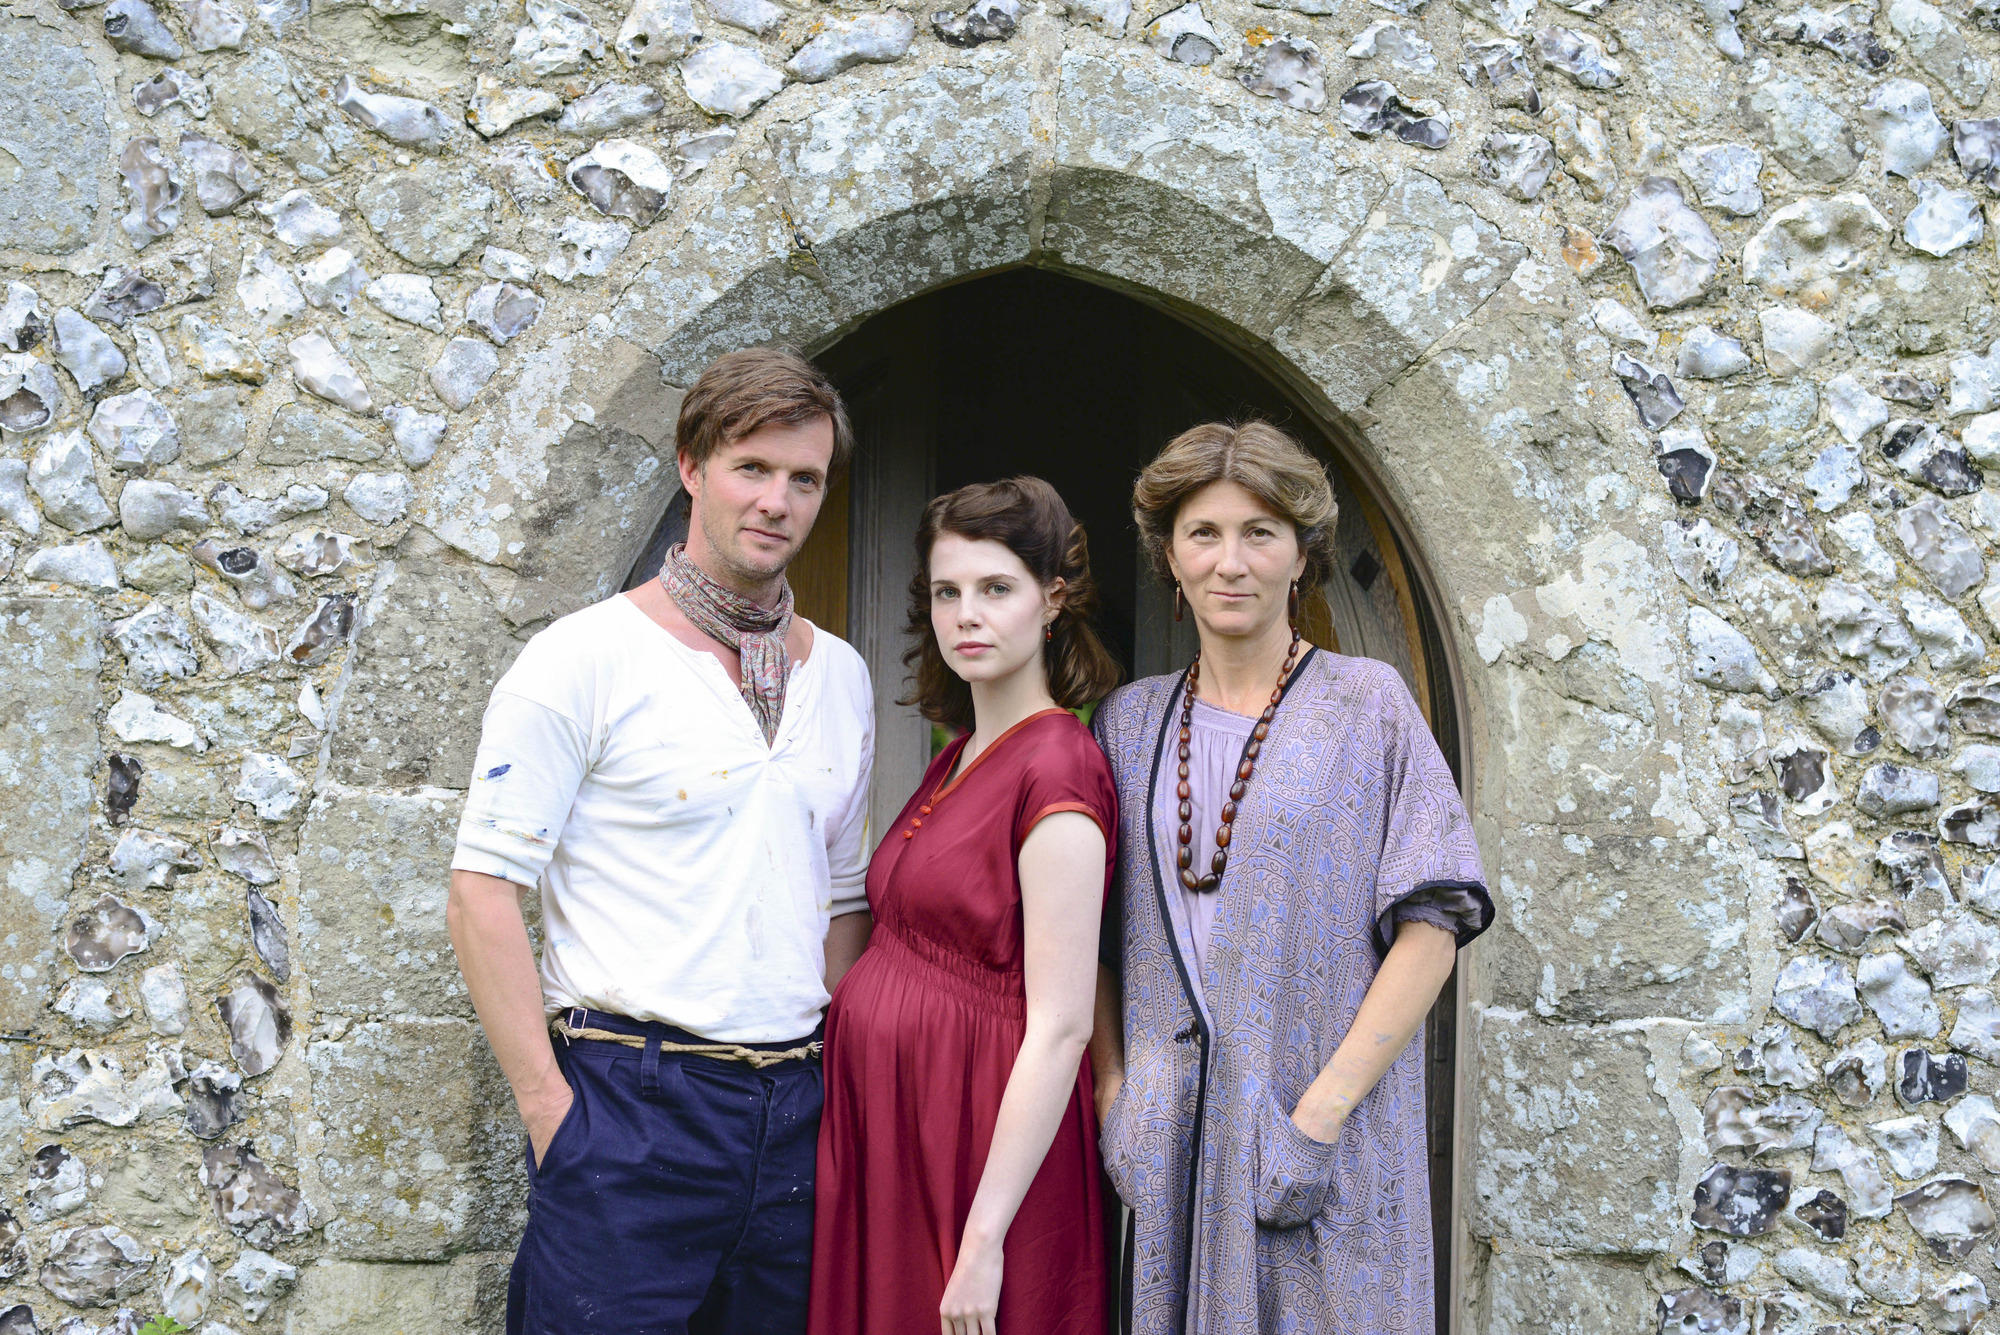 Rupert Penry-Jones as Duncan Grant, Eve Best as Vanessa Bell and Lucy Boynton as Angelica Bell in 'LIFE IN SQUARES'